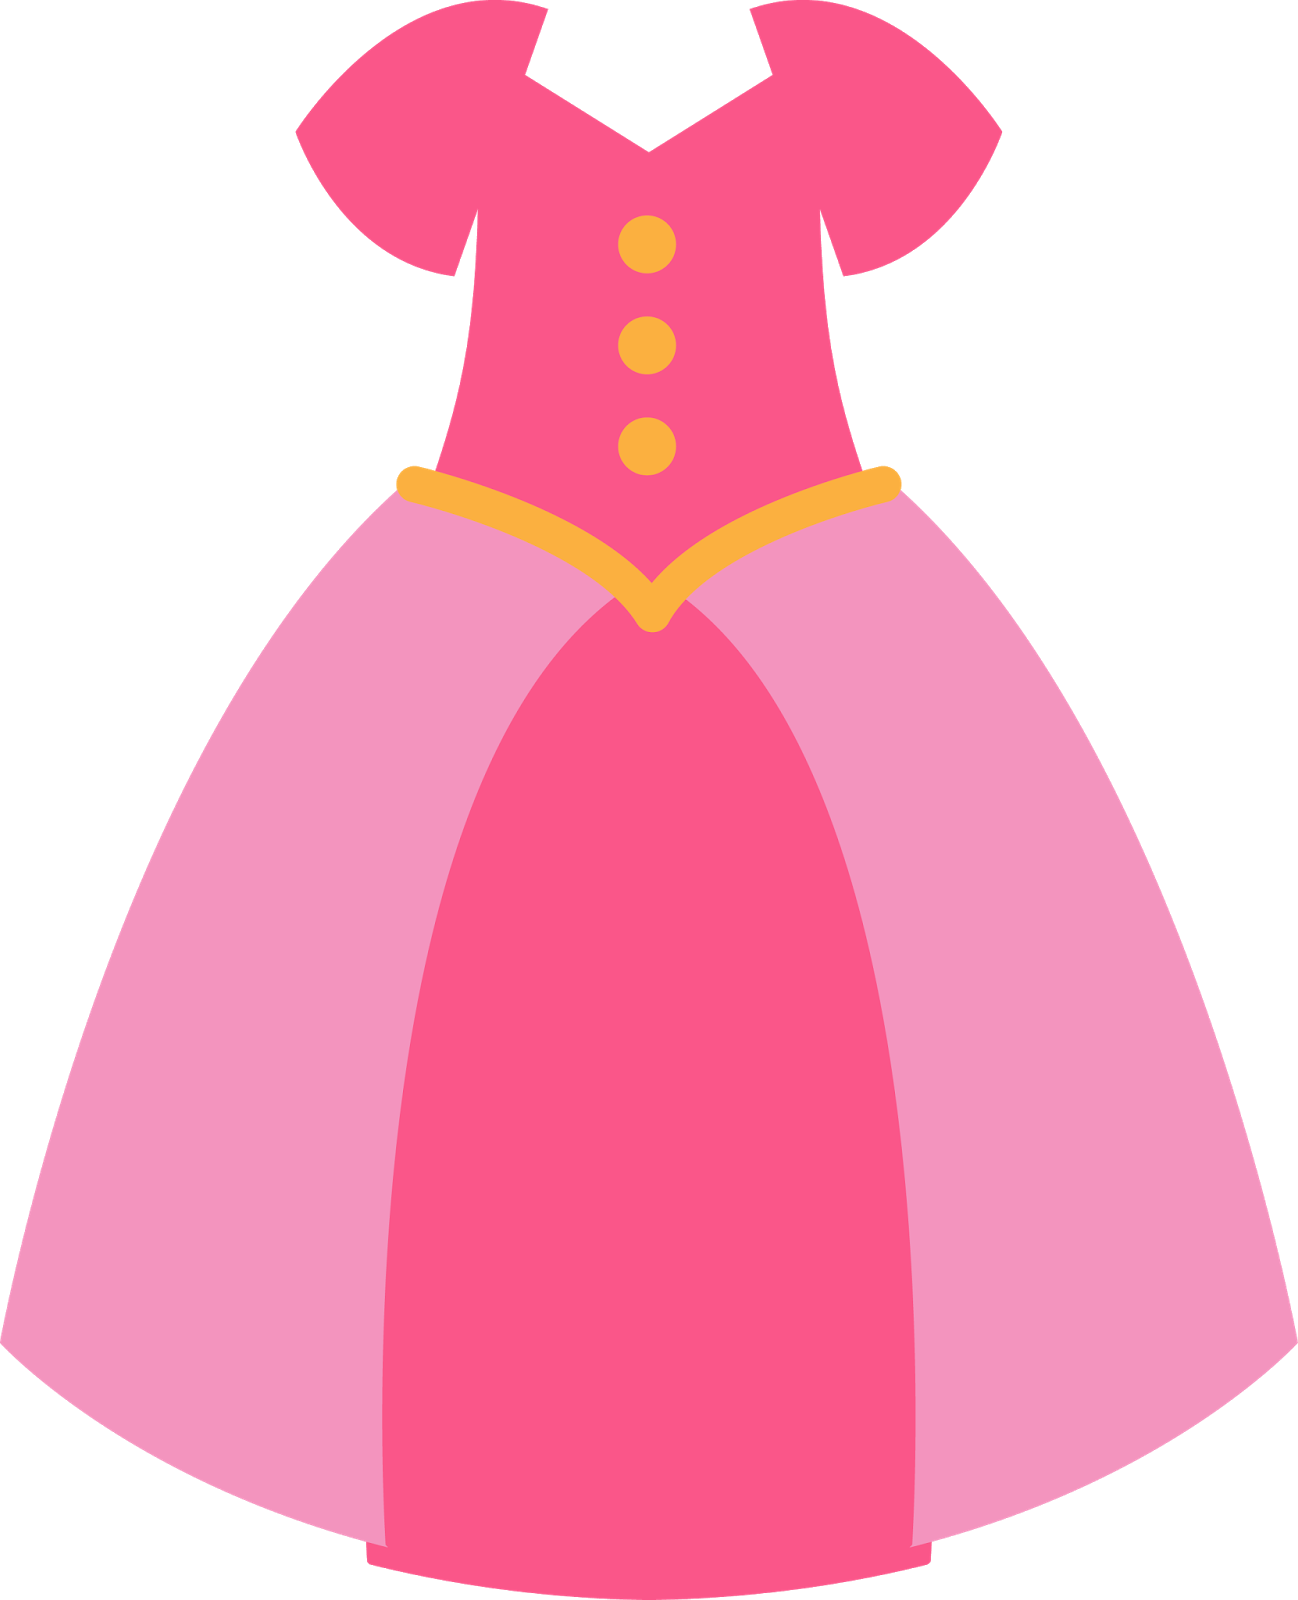 A Pink Dress With Gold Buttons